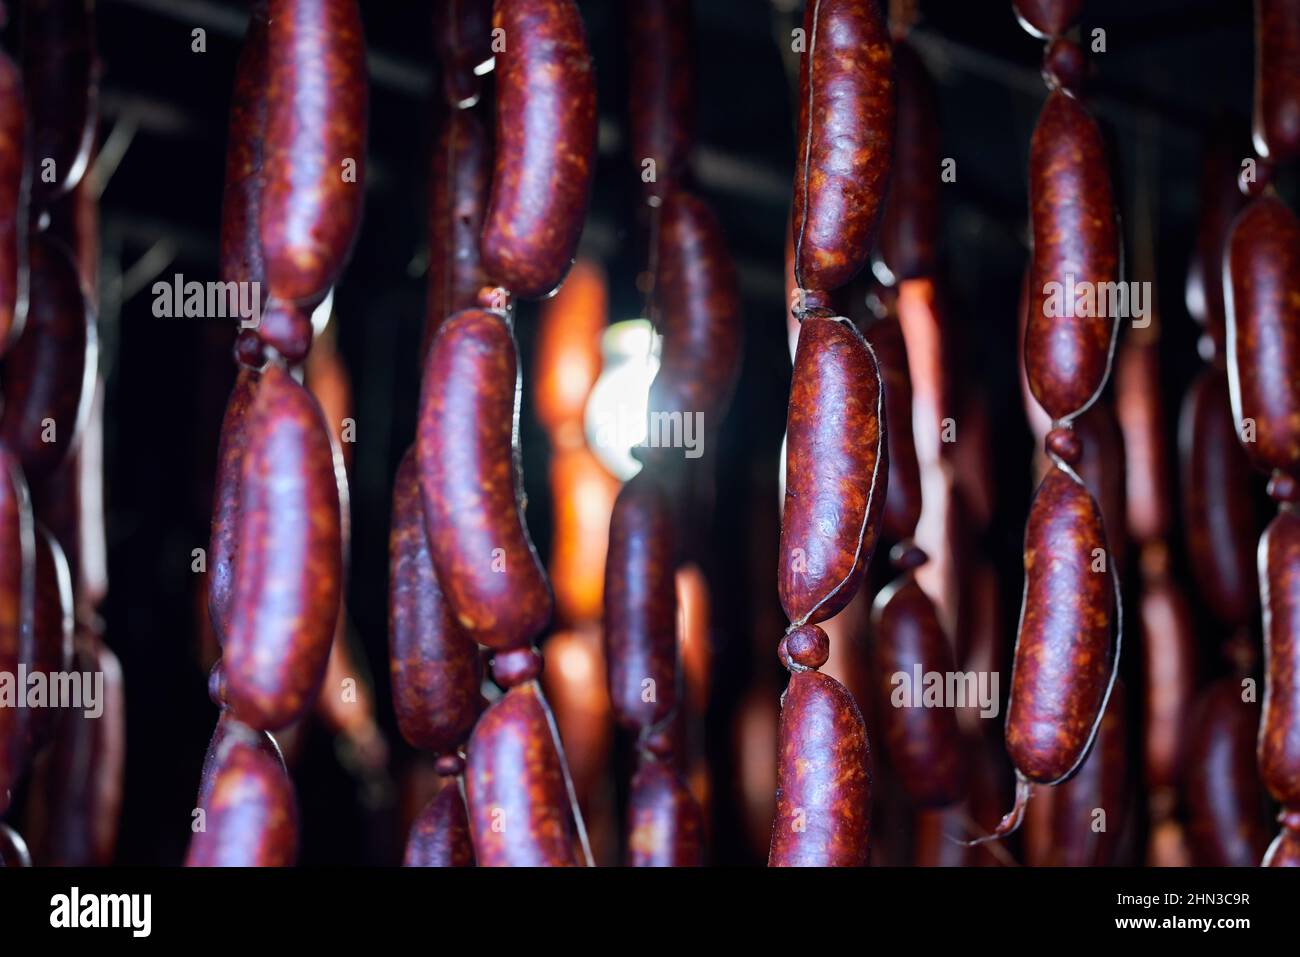 Freshly made sausages with pork and drying hanged with wood smoke and air. Stock Photo